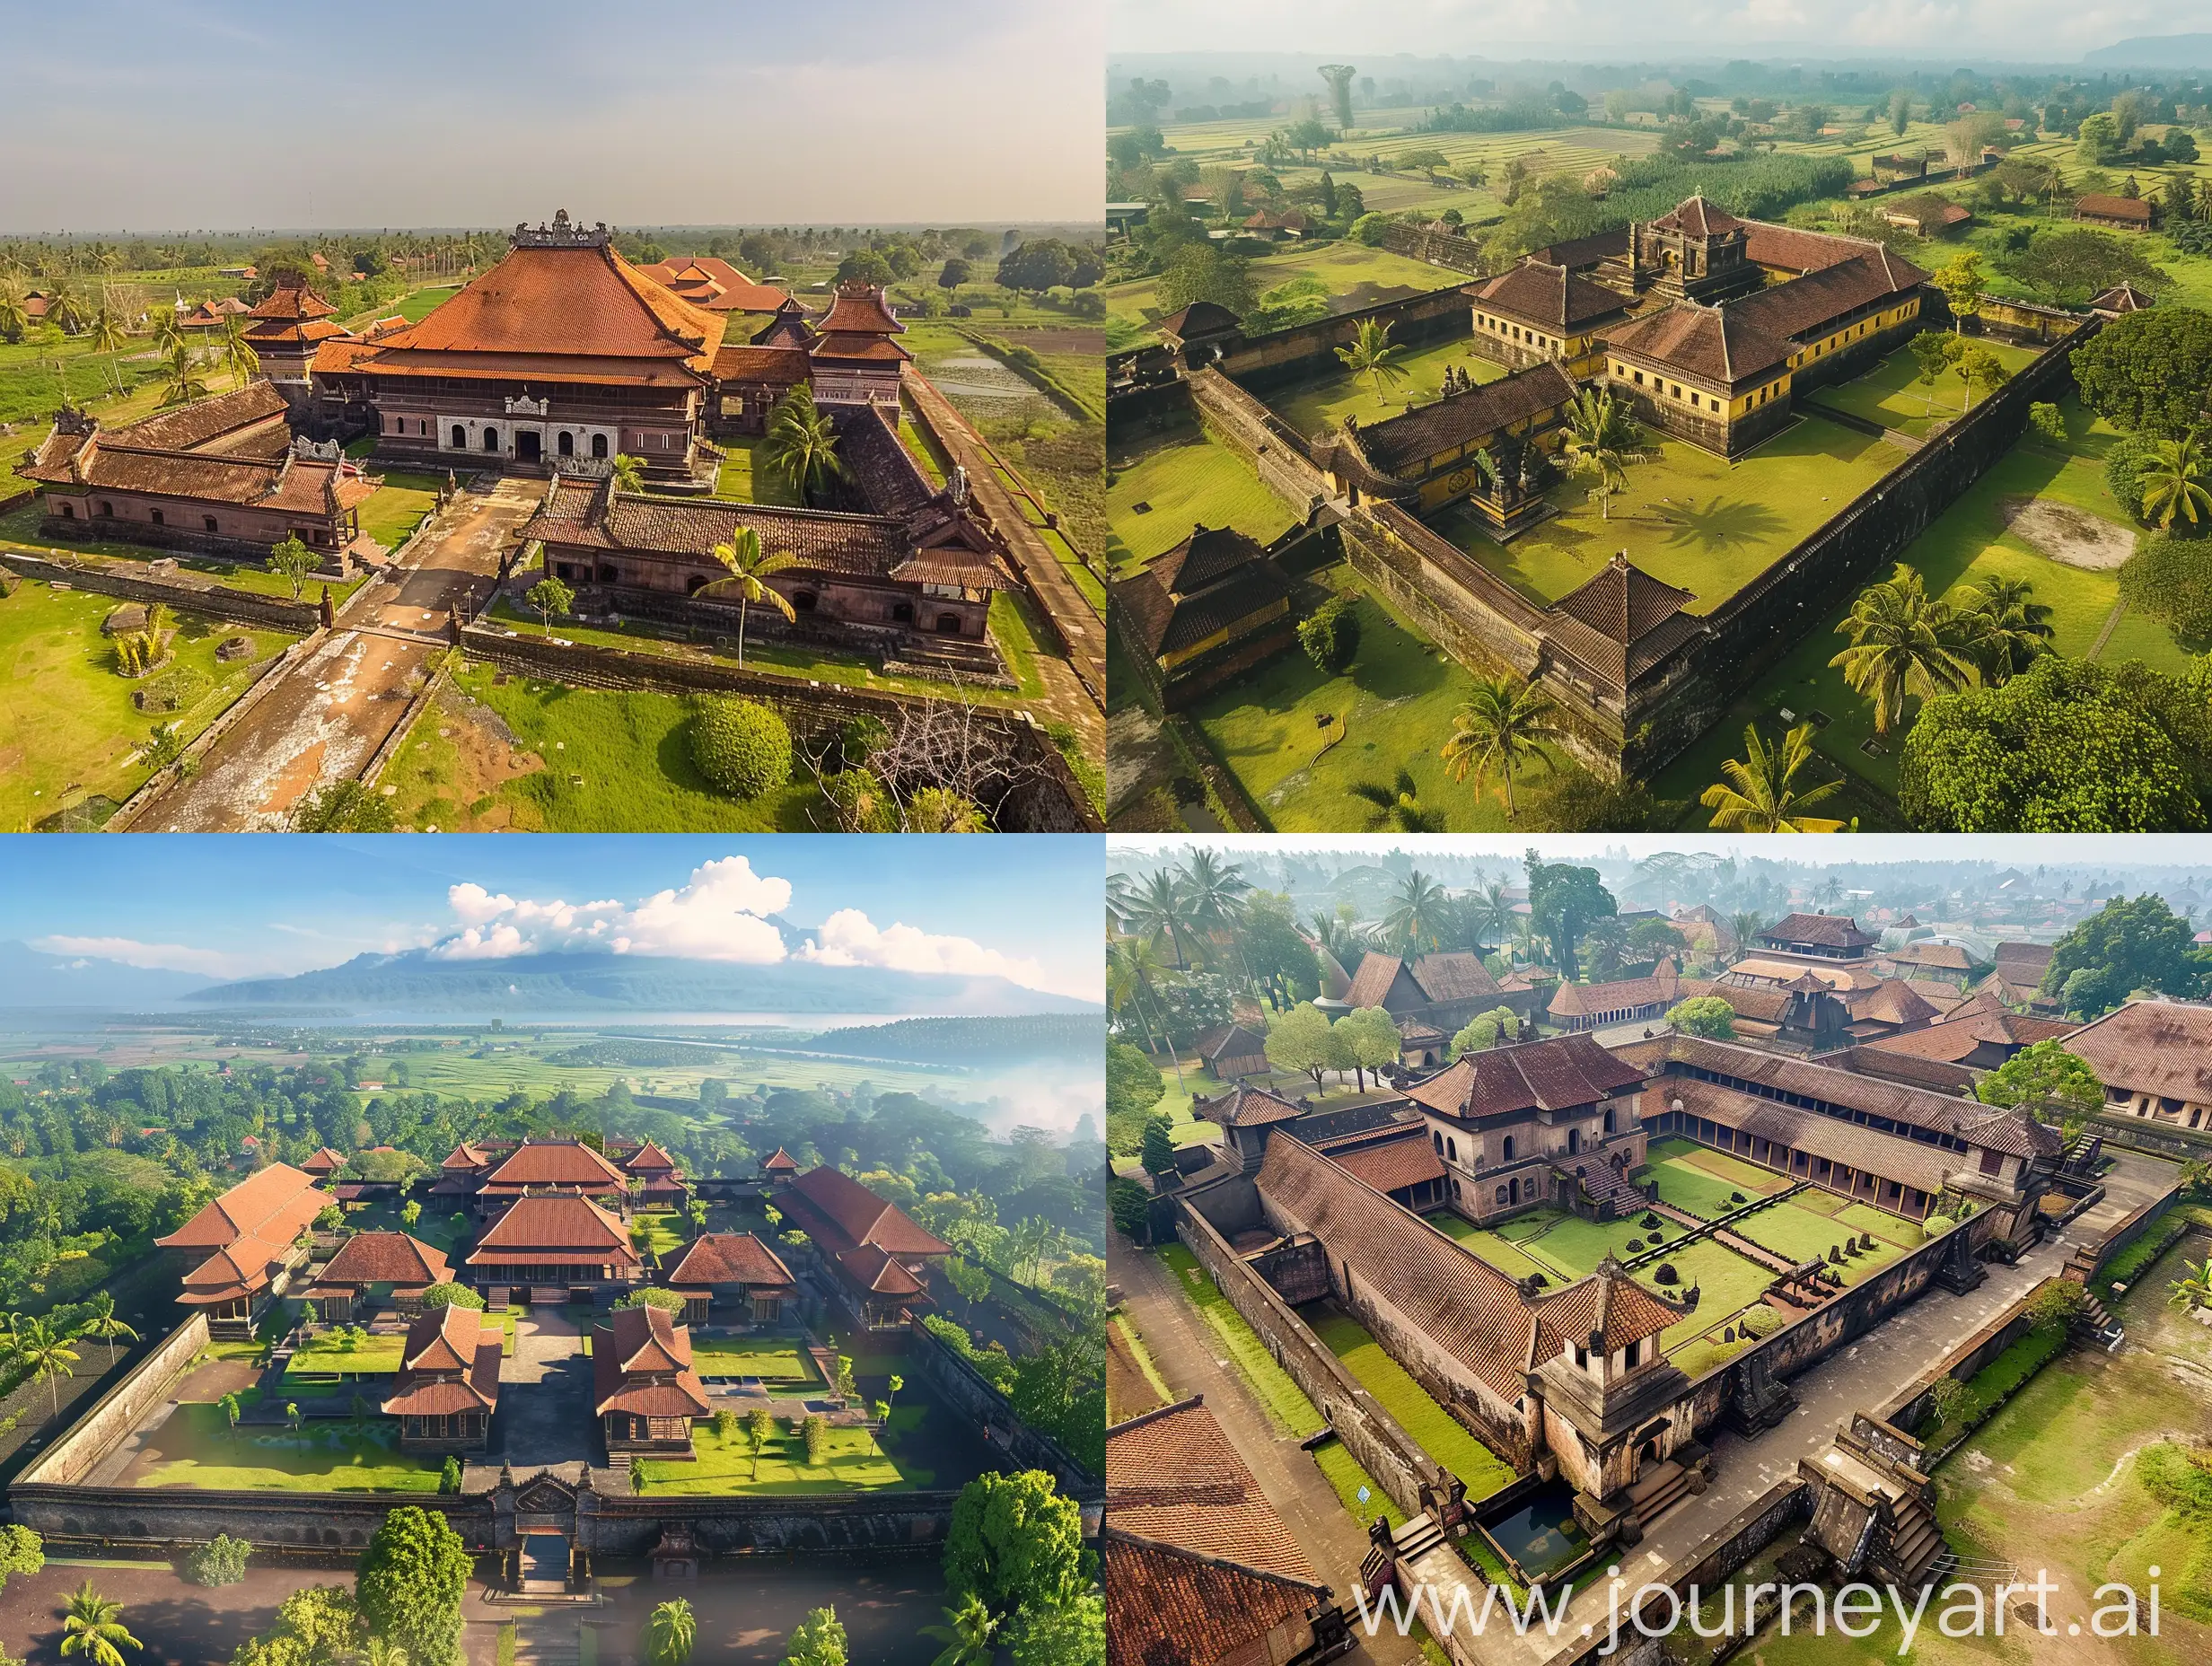 Royal-Palace-of-Siliwangi-Kingdom-A-Colorful-Aerial-View-from-1500s-Indonesia